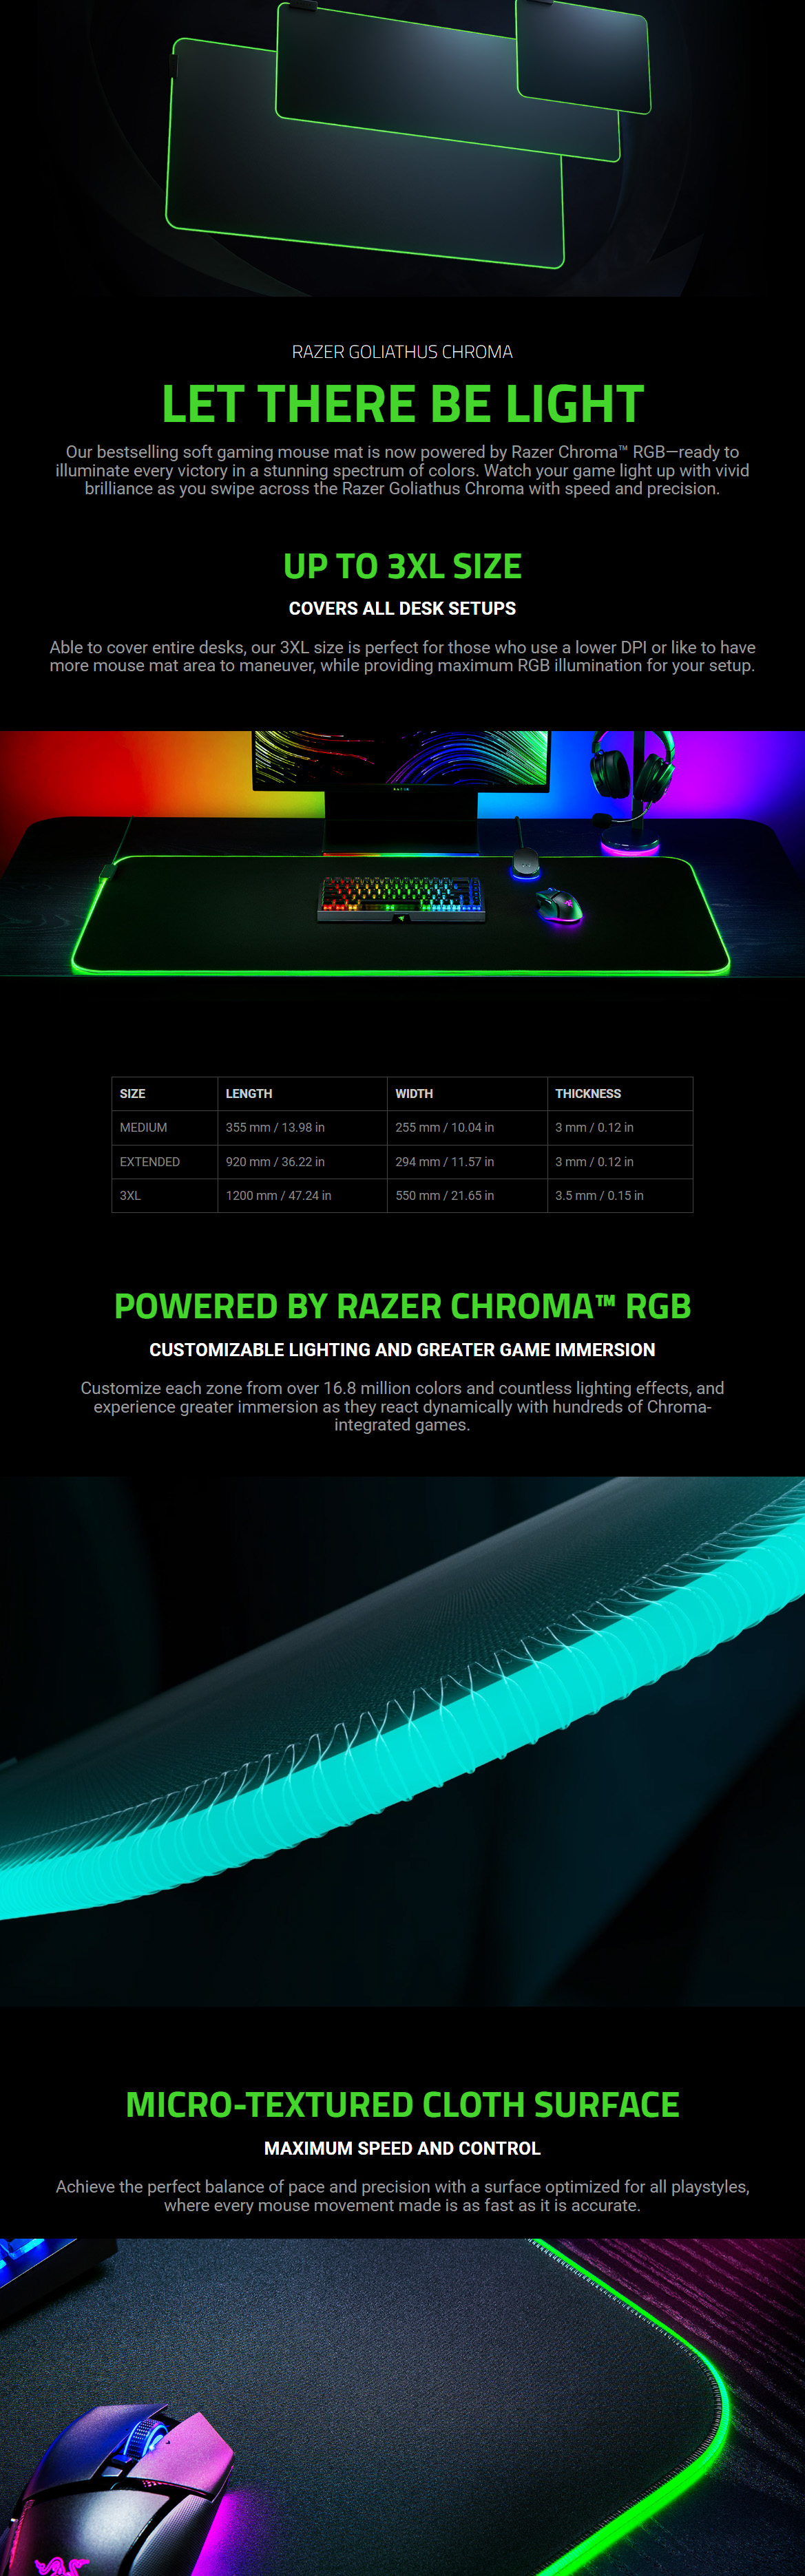 Mouse-Pads-Razer-Goliathus-Chroma-3XL-Soft-Gaming-Mouse-Mat-with-Chroma-1